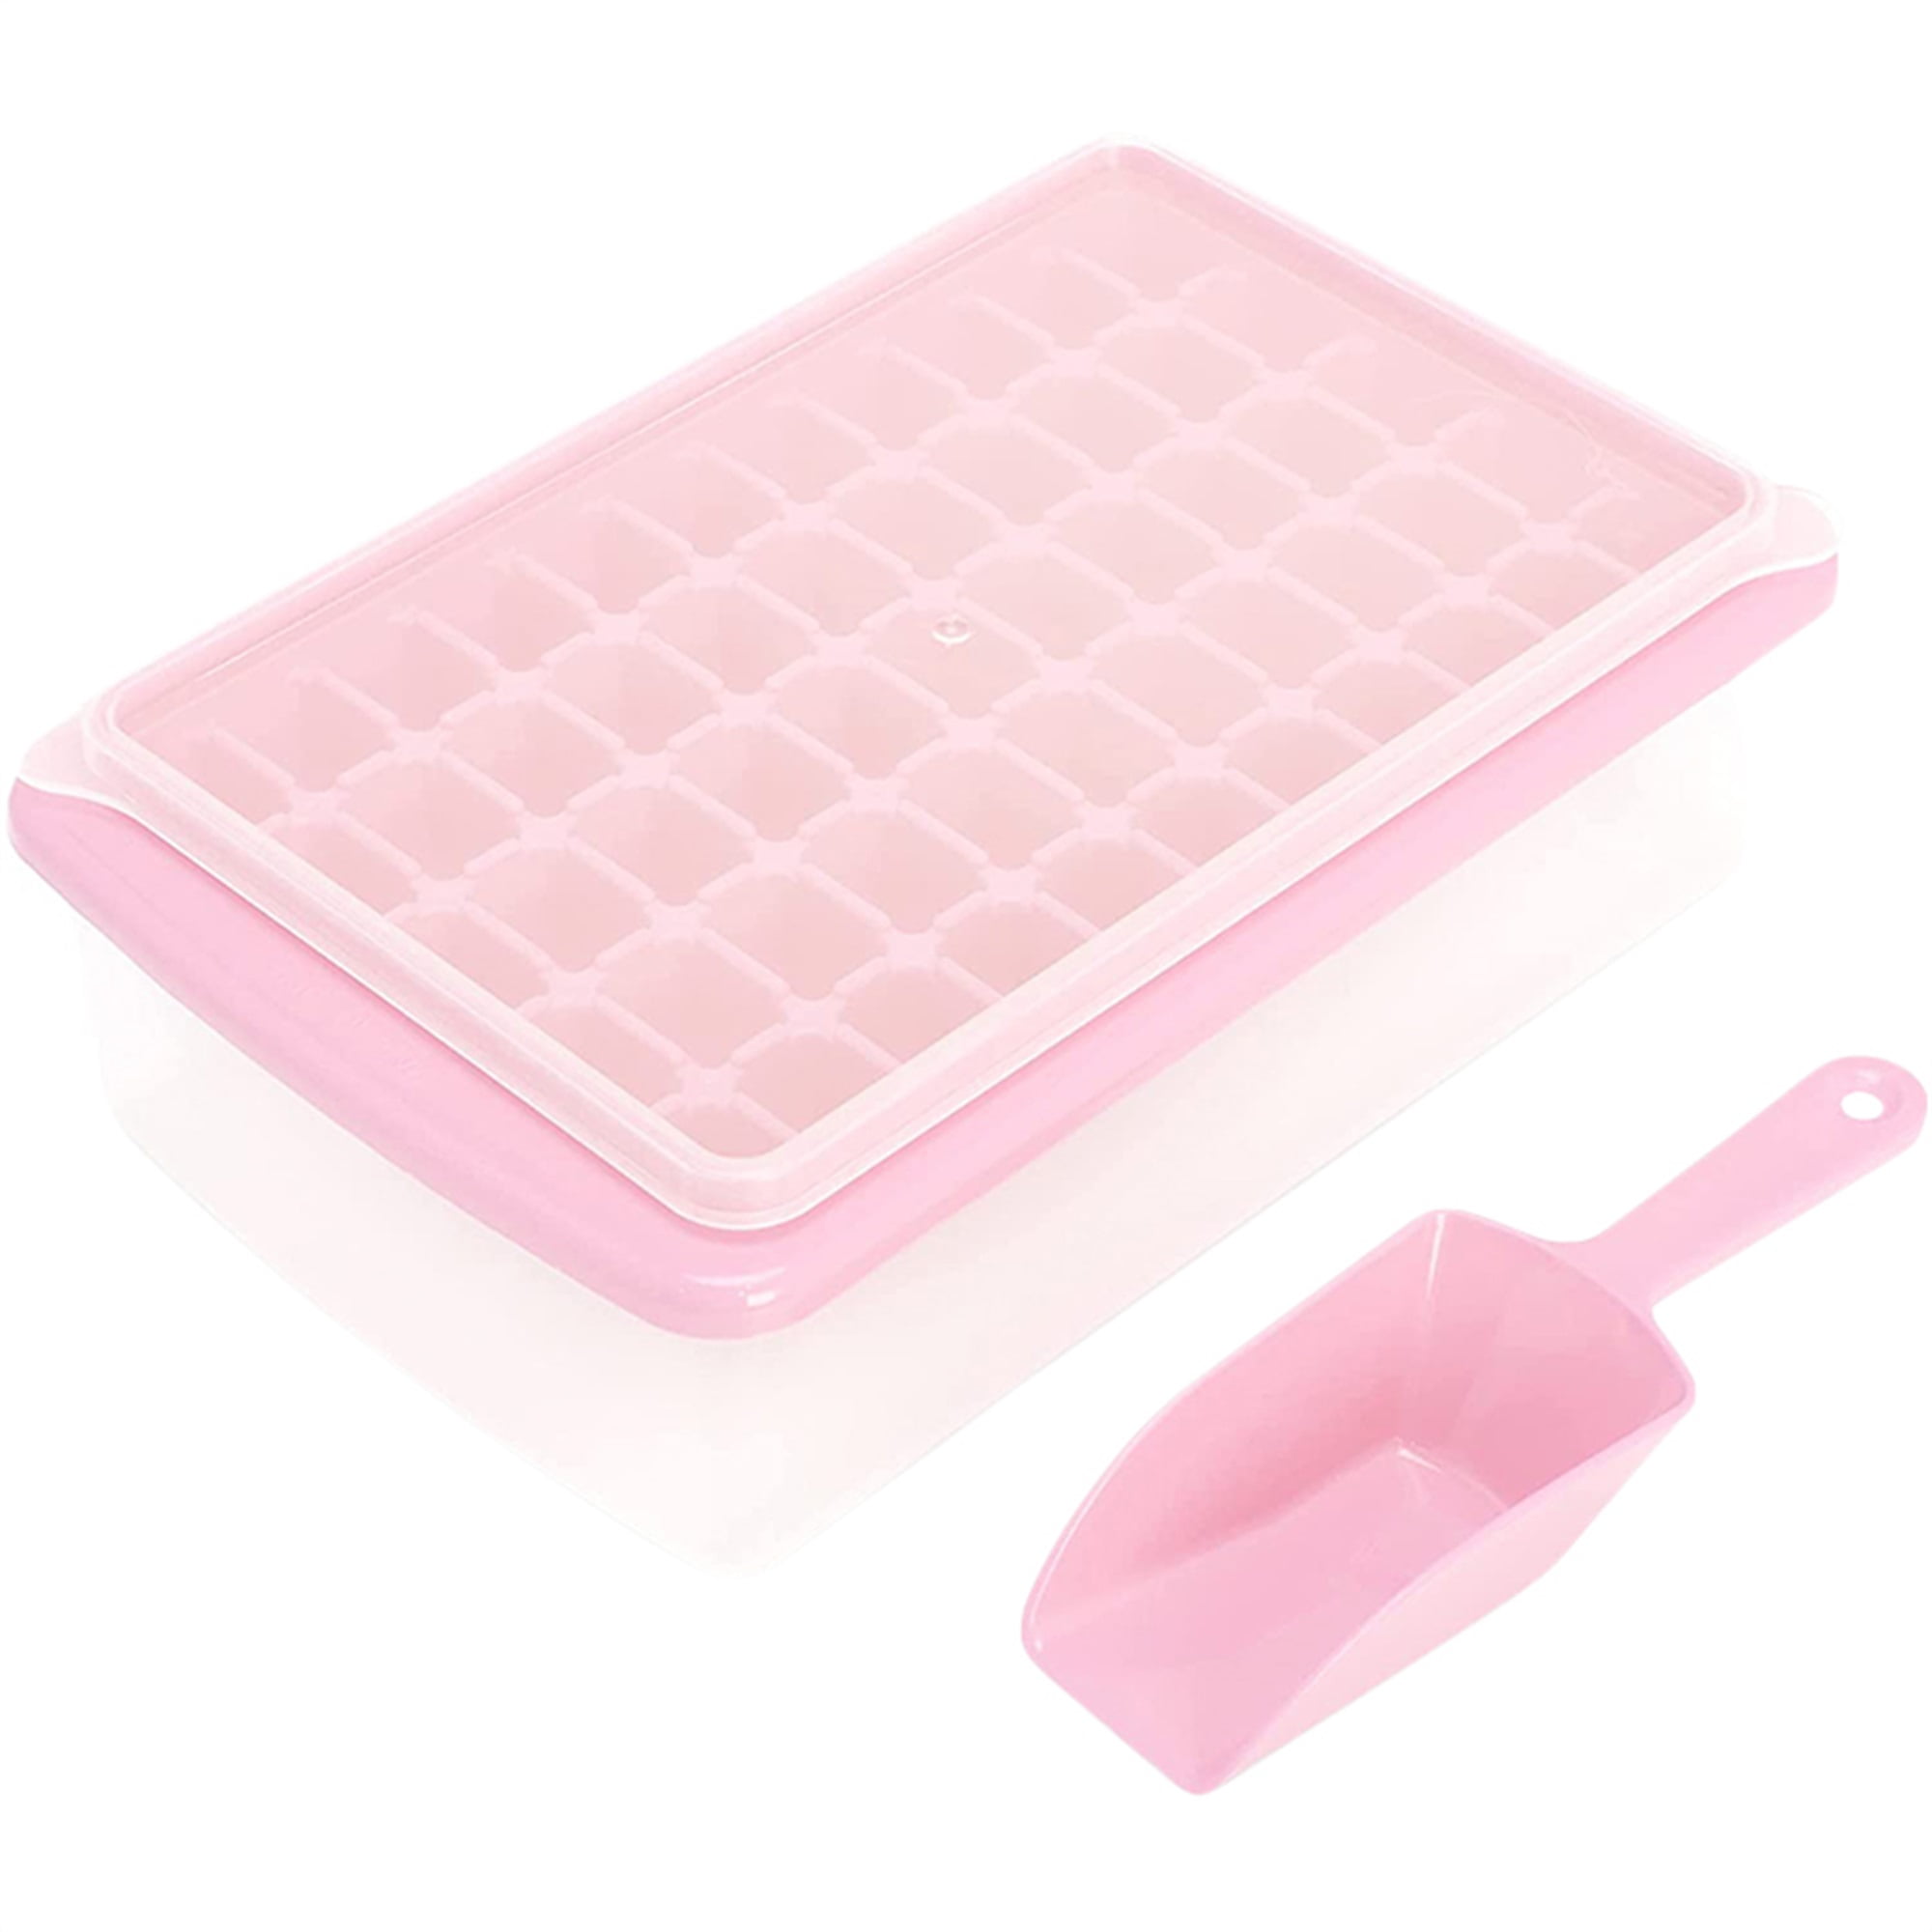 New Flip Lid Ice Chill Tray Appetizers On Ice 2 Piece Set 